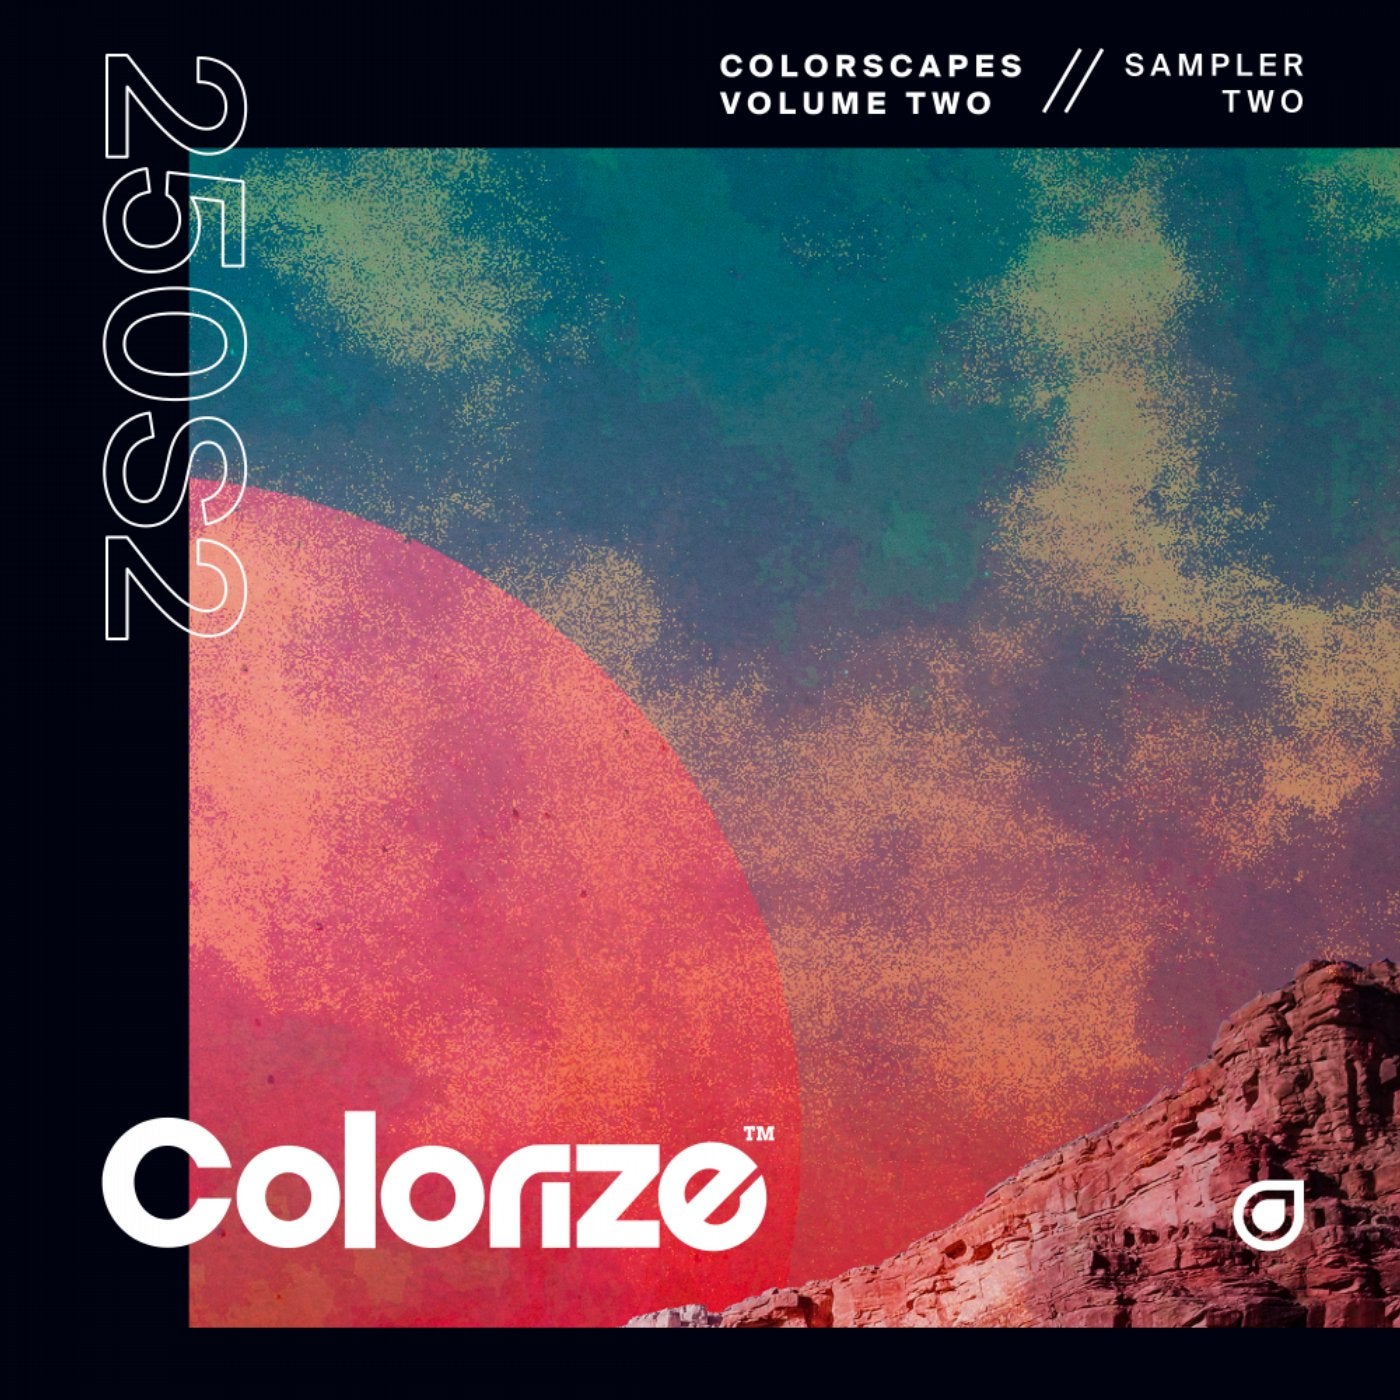 Colorscapes Volume Two - Sampler Two